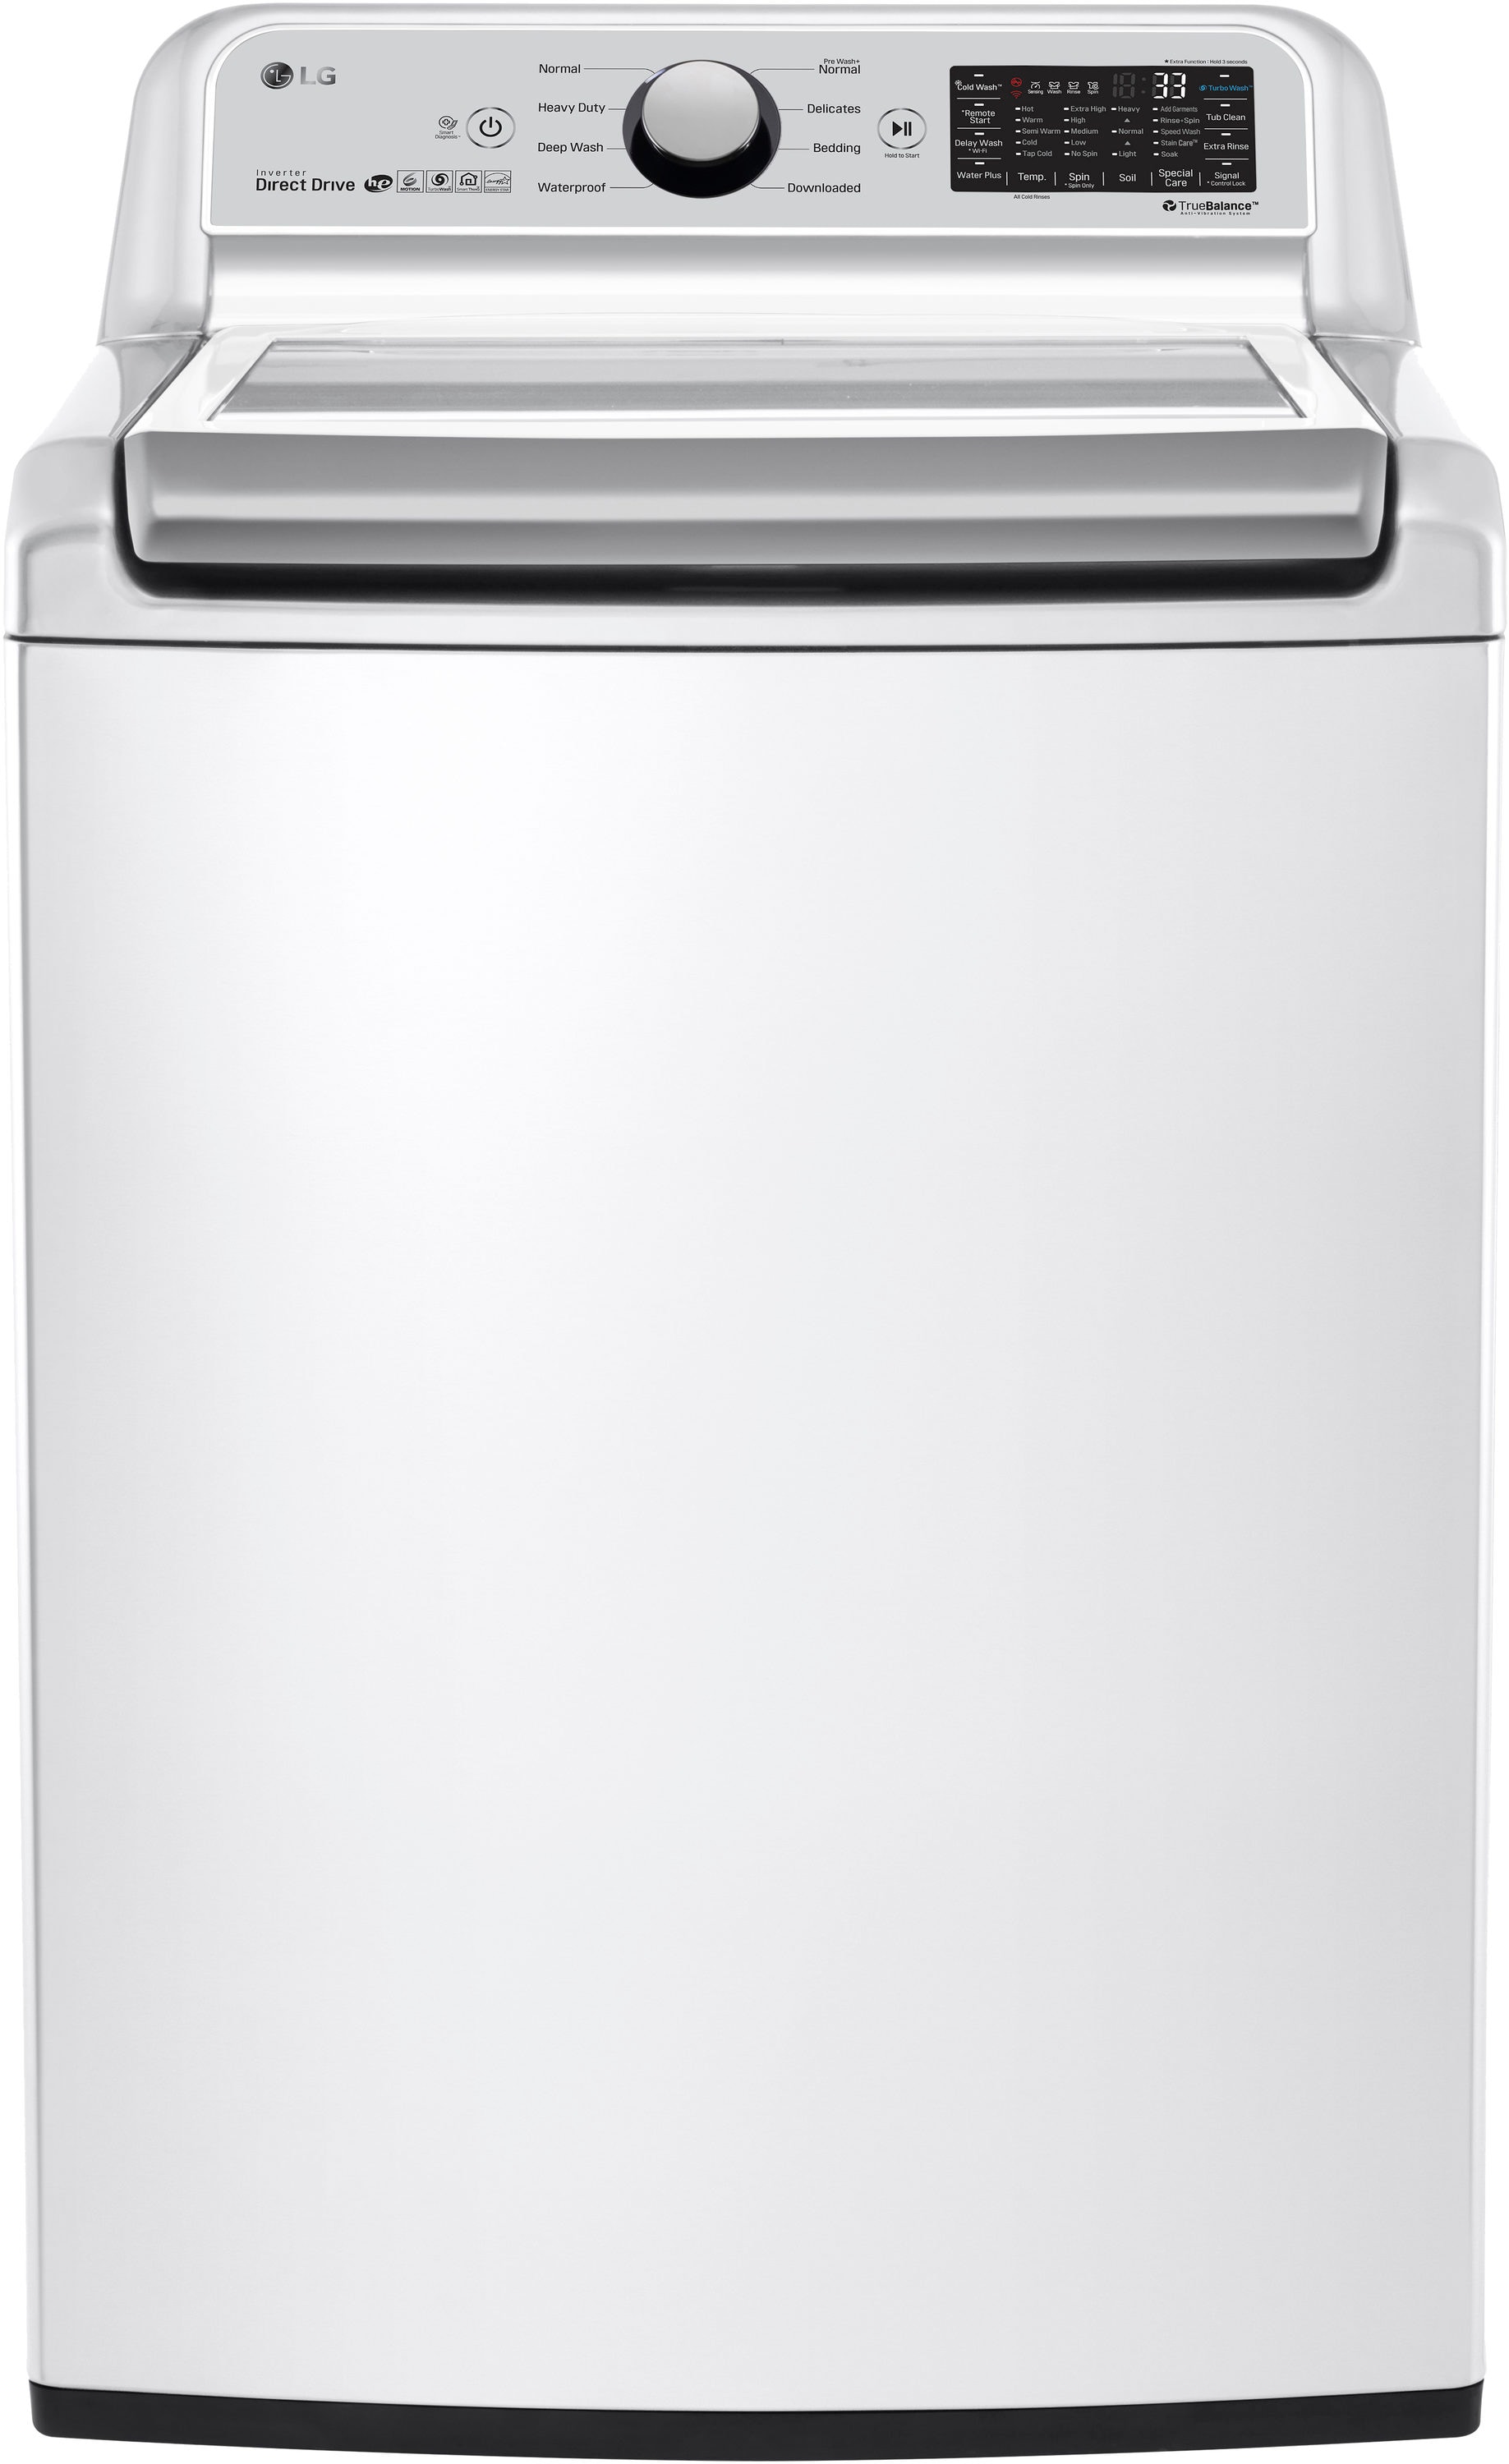 lg-appliances-mail-in-rebate-offer-at-lowes